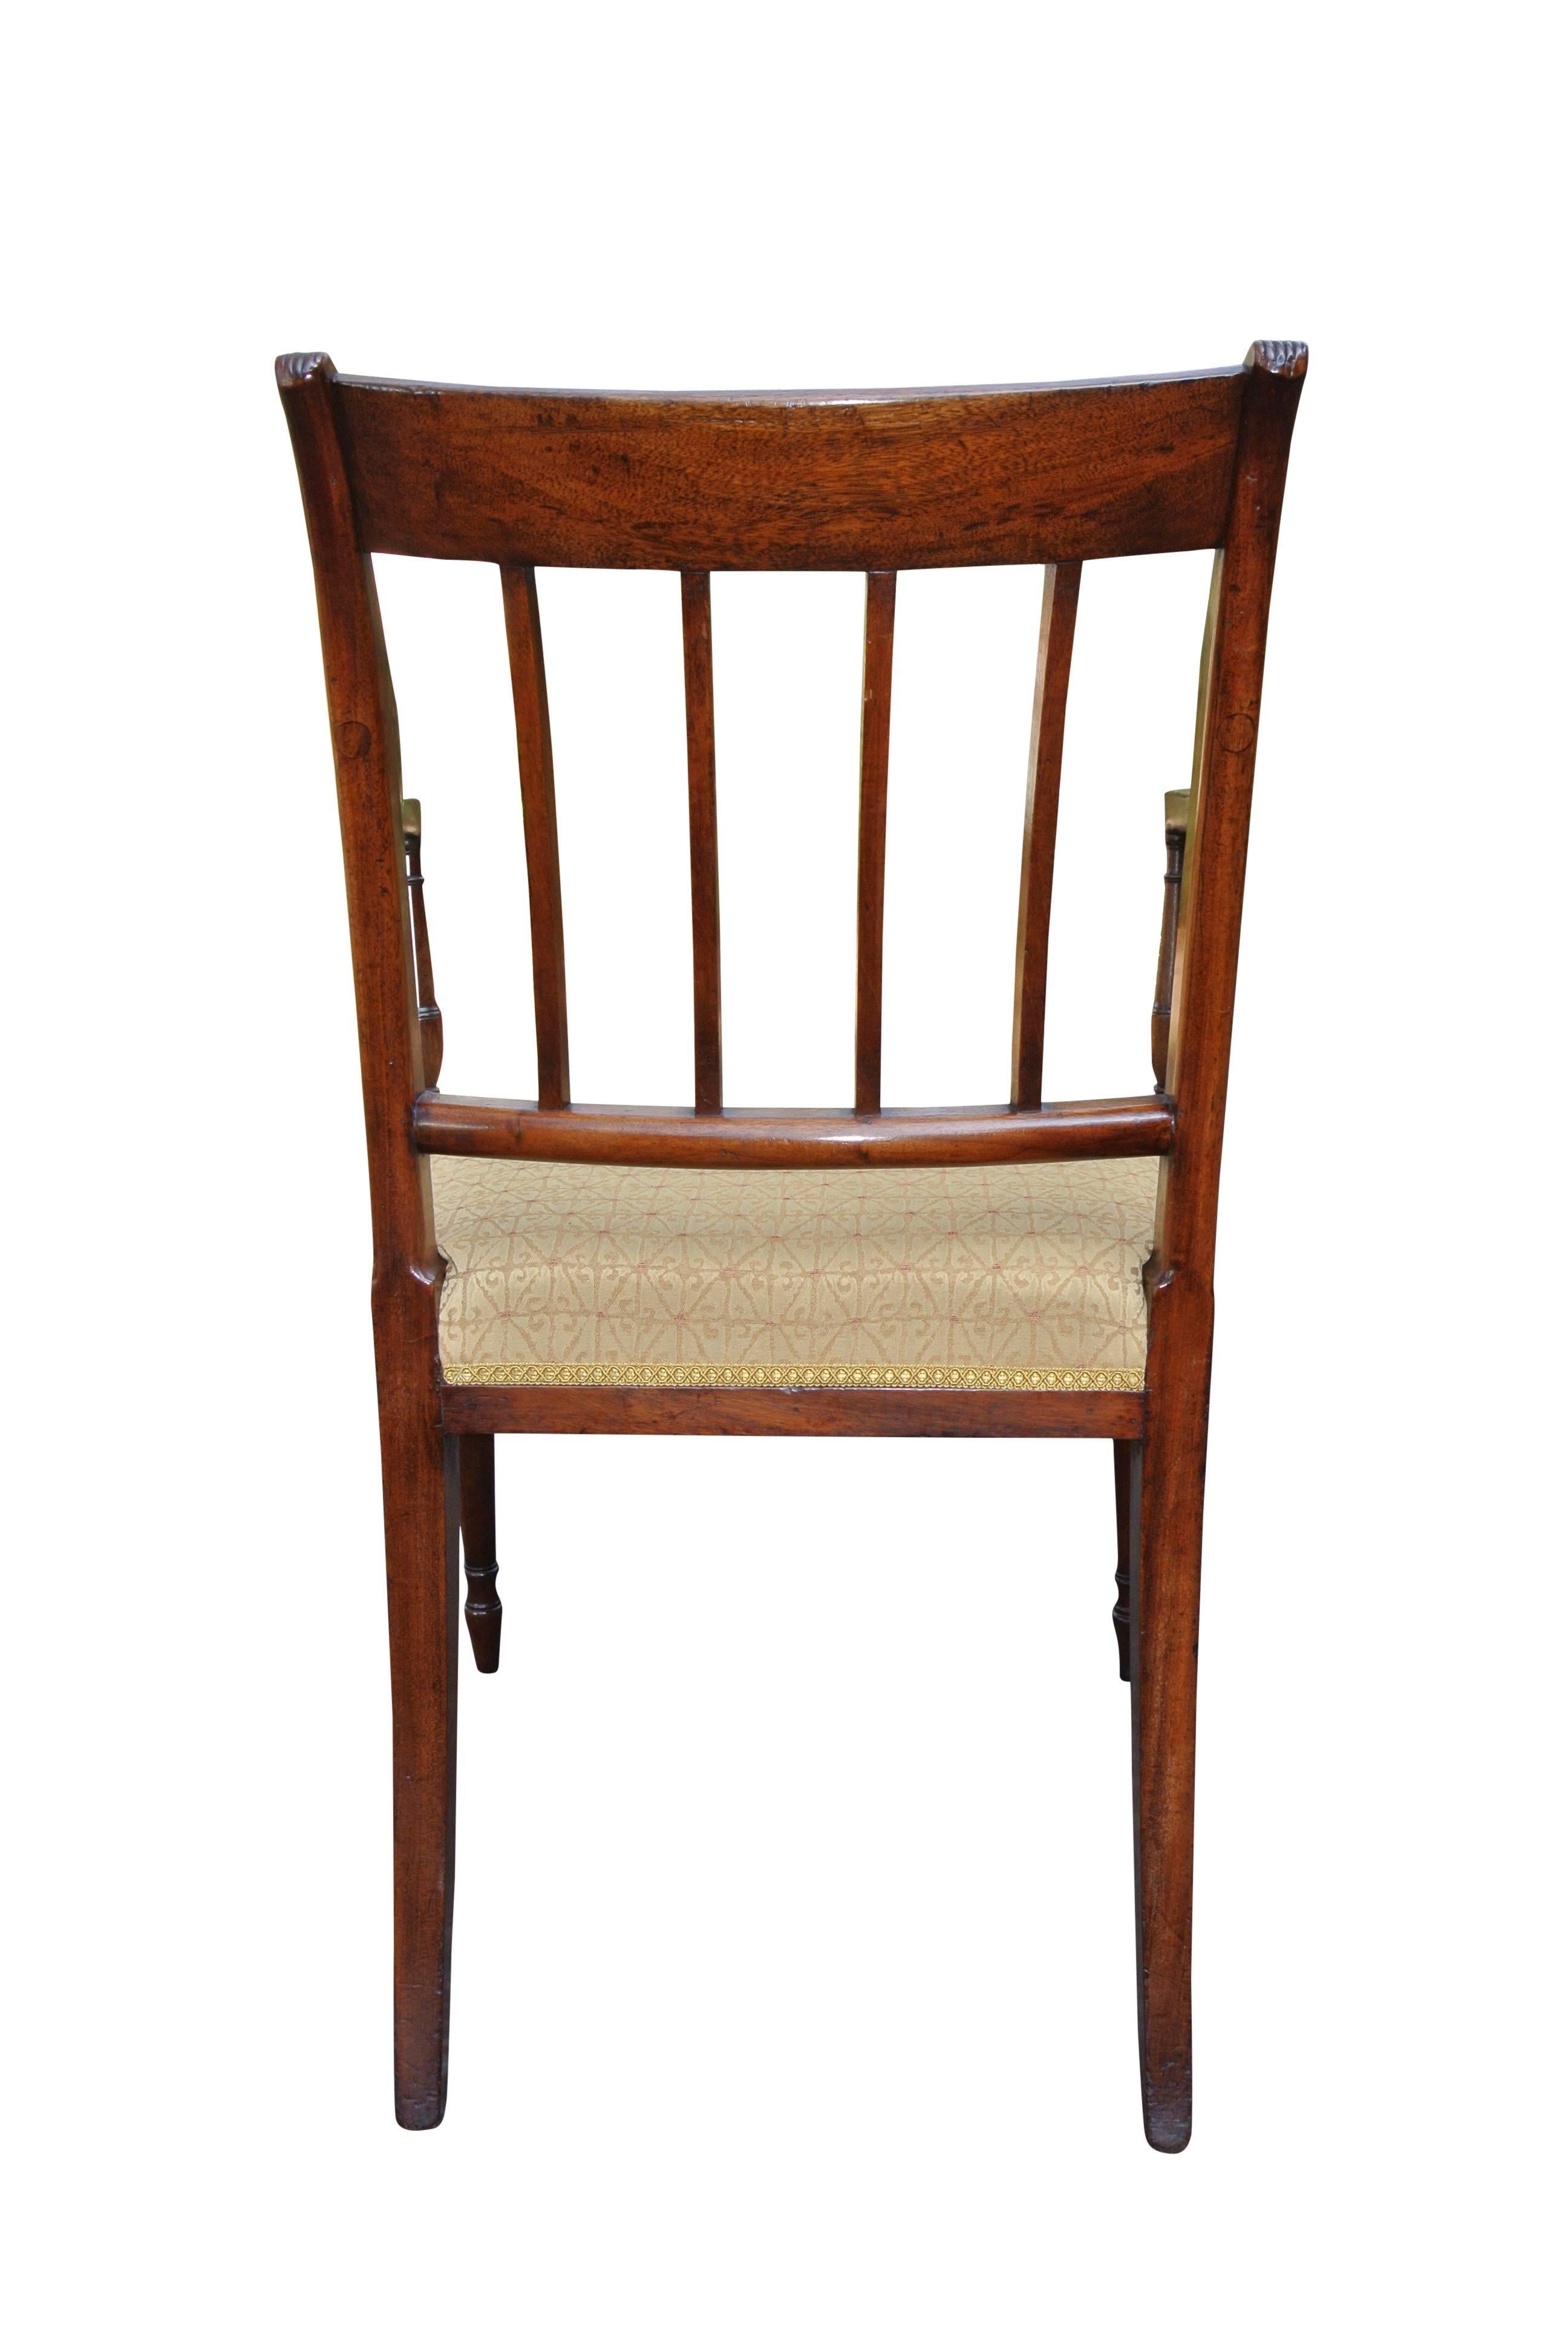 Set of 12 beautiful quality Sheraton design mahogany dining chairs, having been recently reupholstered. The two carvers and six side chairs are of the period, four identical side chairs were made in circa 1880 by J Murphy of 215 Brompton Rd